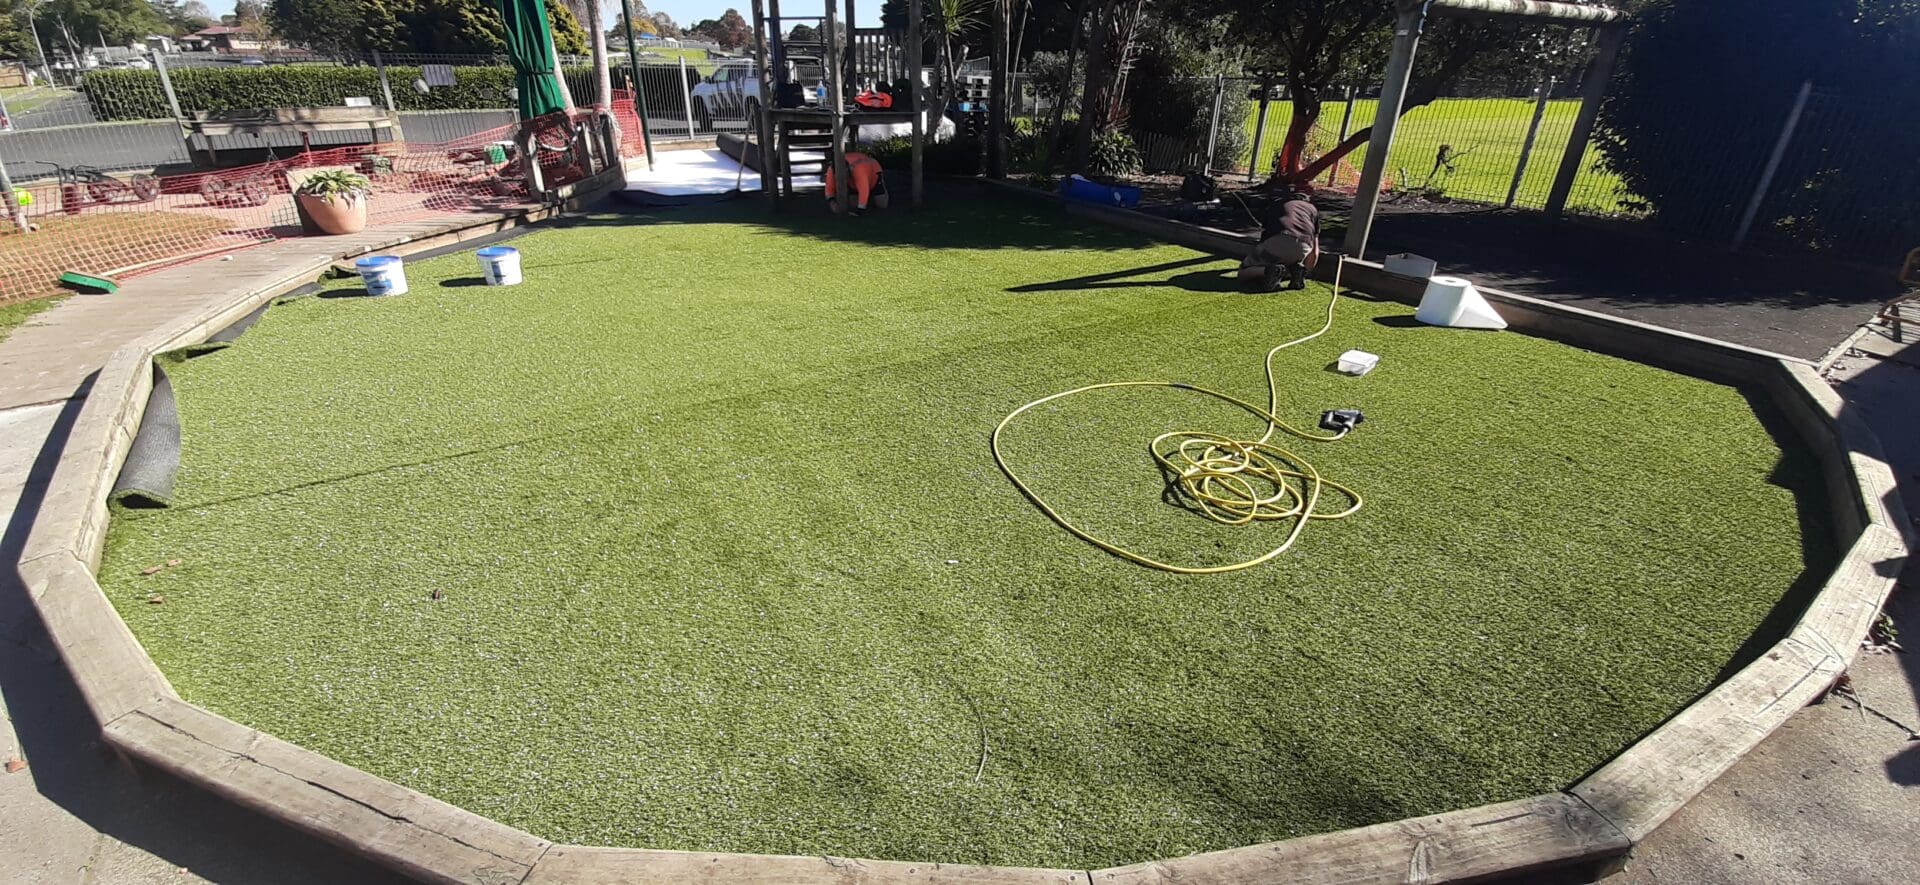 TigerTurf 35mm PowerPlay shock pads beneath TigerTurf playgrounds for safe play